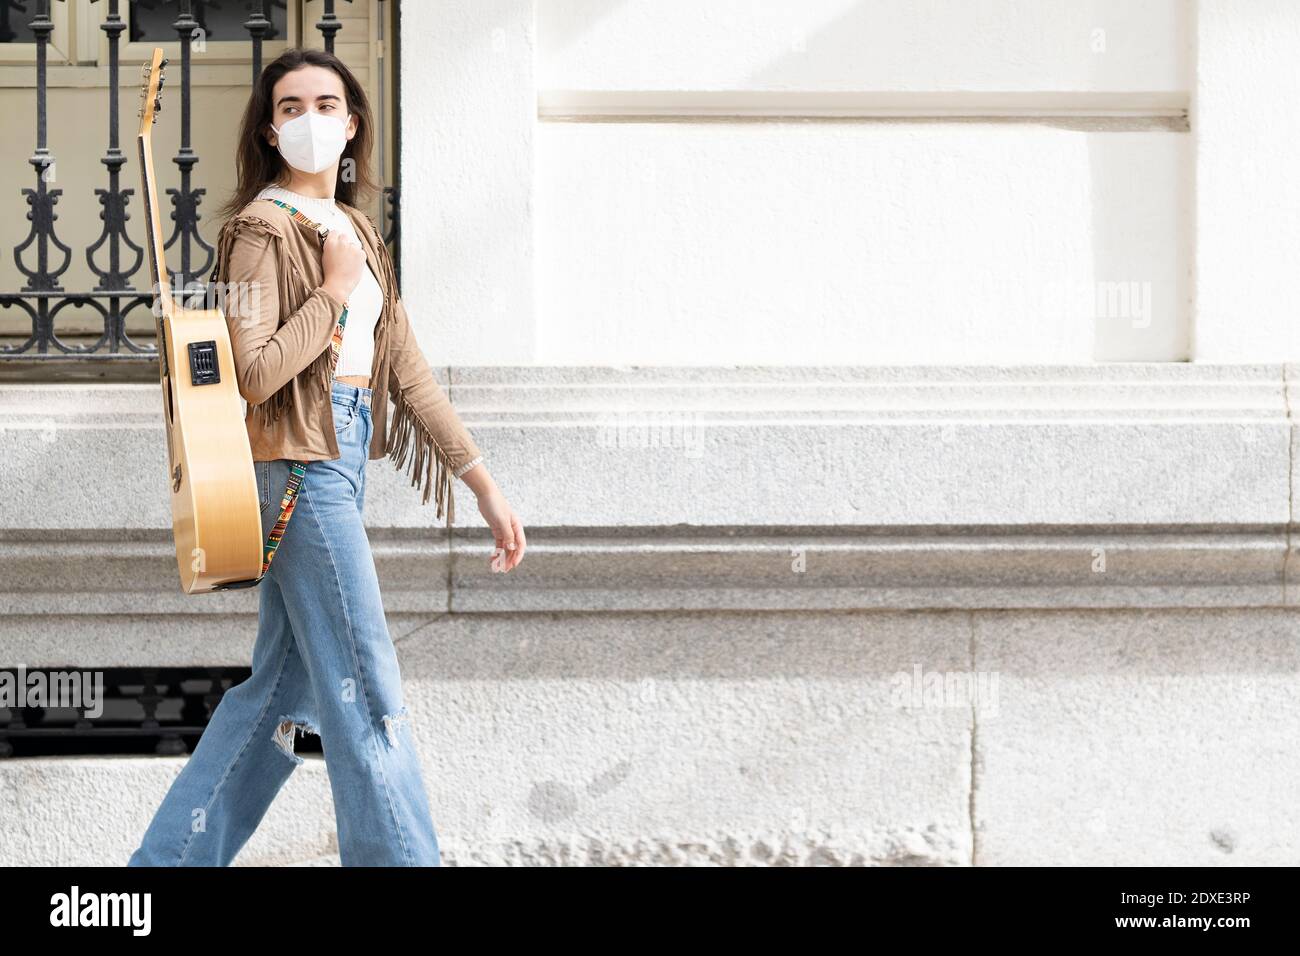 Female musician walking with guitar by building in city during pandemic Stock Photo